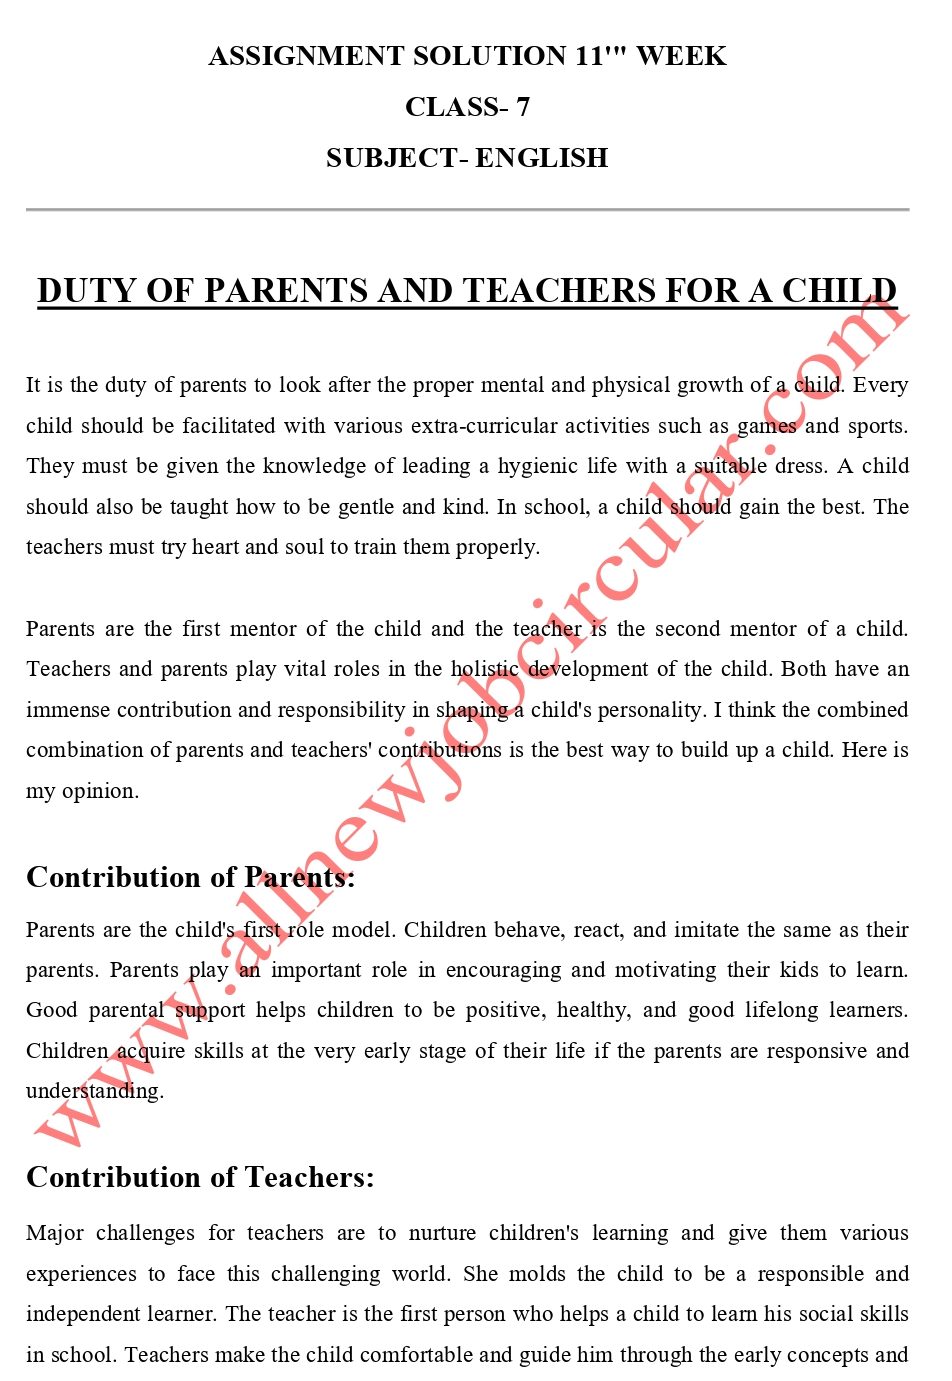 class 7 english assignment 2021 11th week_page-0001